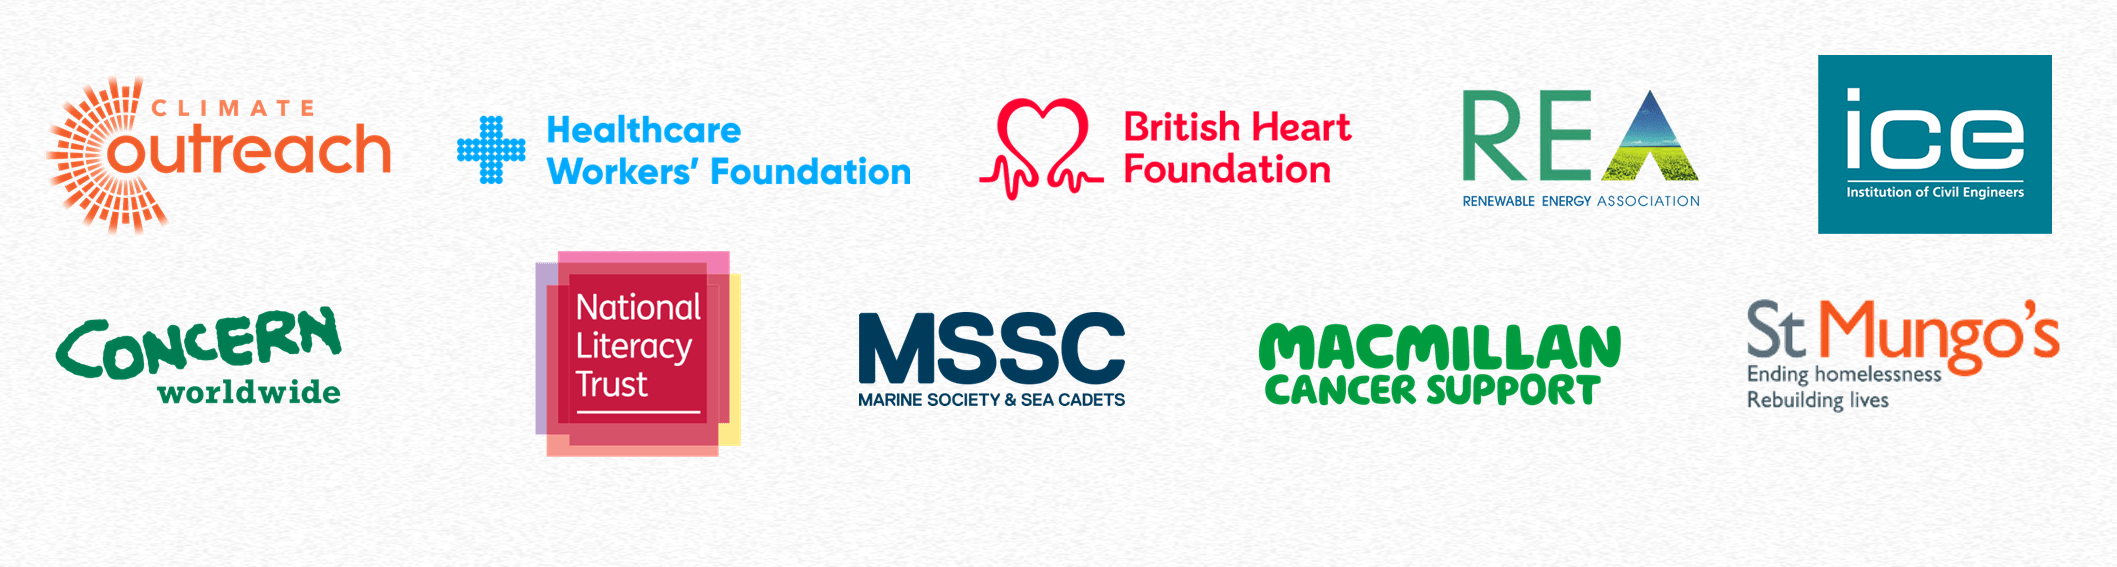 Charity logos including Climate Outreach, Concern Worldwide, the British Heart Foundation and Macmillan Cancer Support